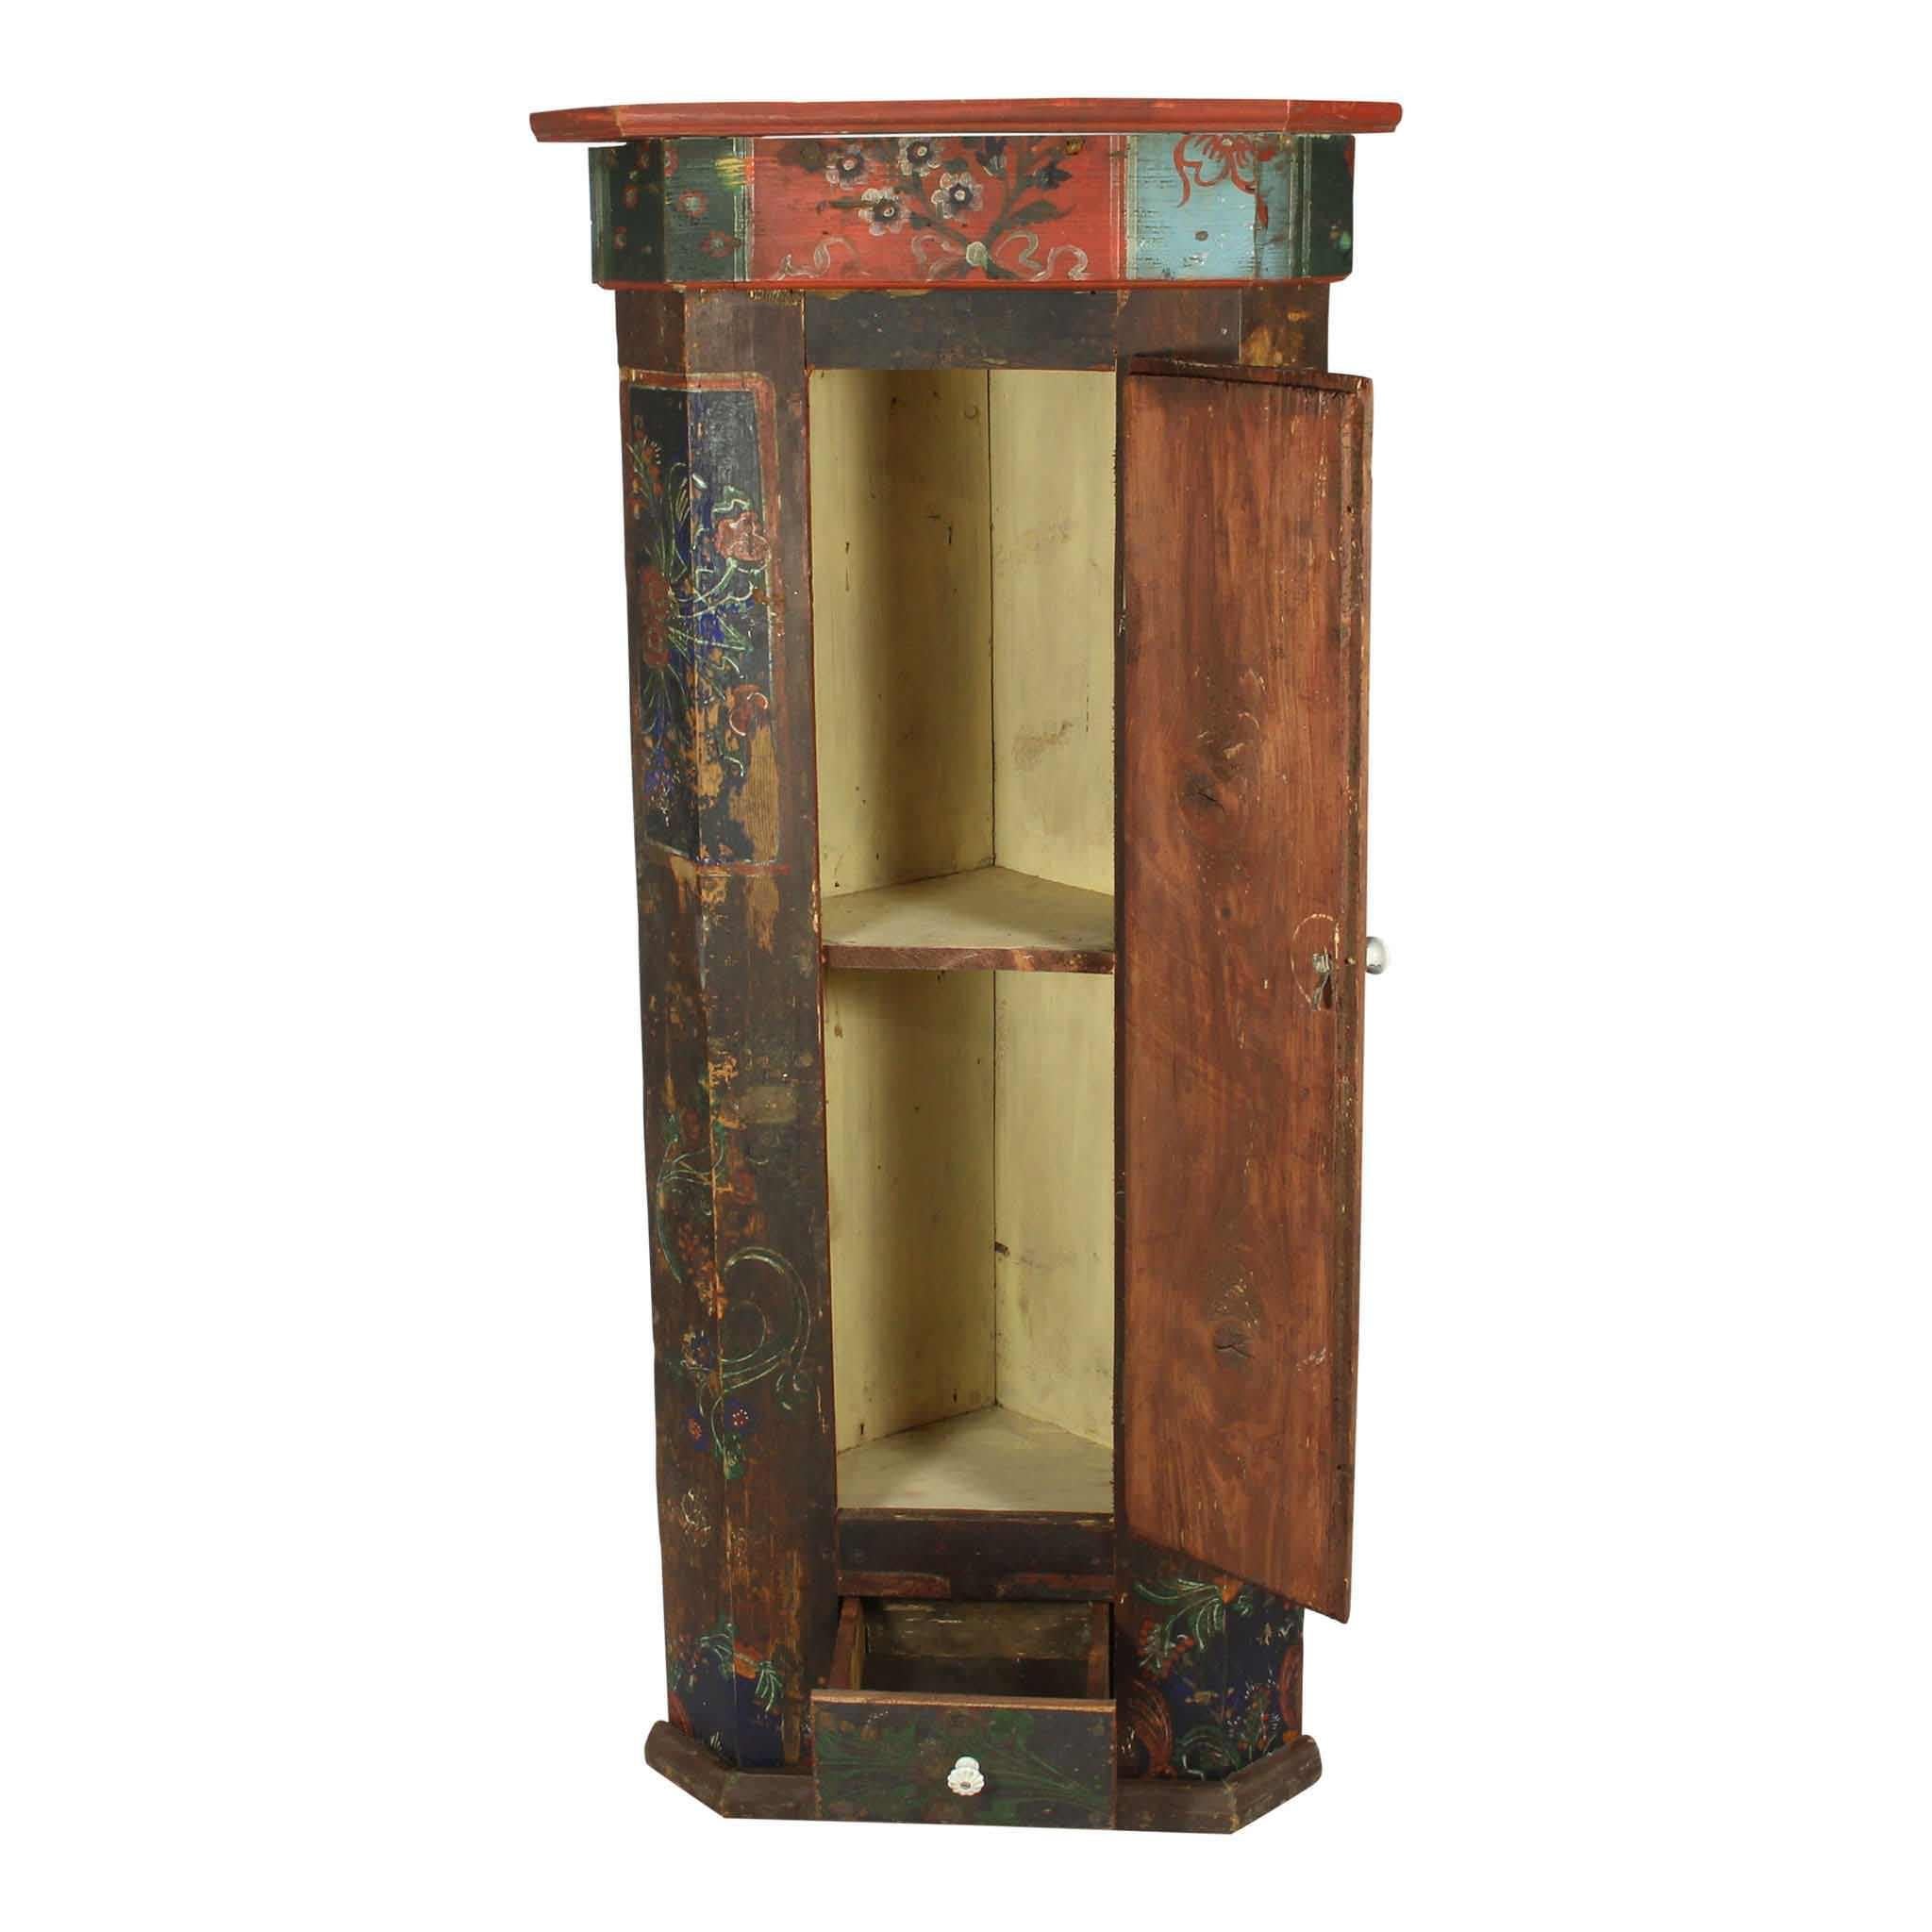 Hand-painted in rich, vibrant colors true to Romanian folk art, this petite corner cabinet showcases a small footprint and triangular shaped back, making it ideal to tuck into even the smallest of corners. The painting, which features a floral motif